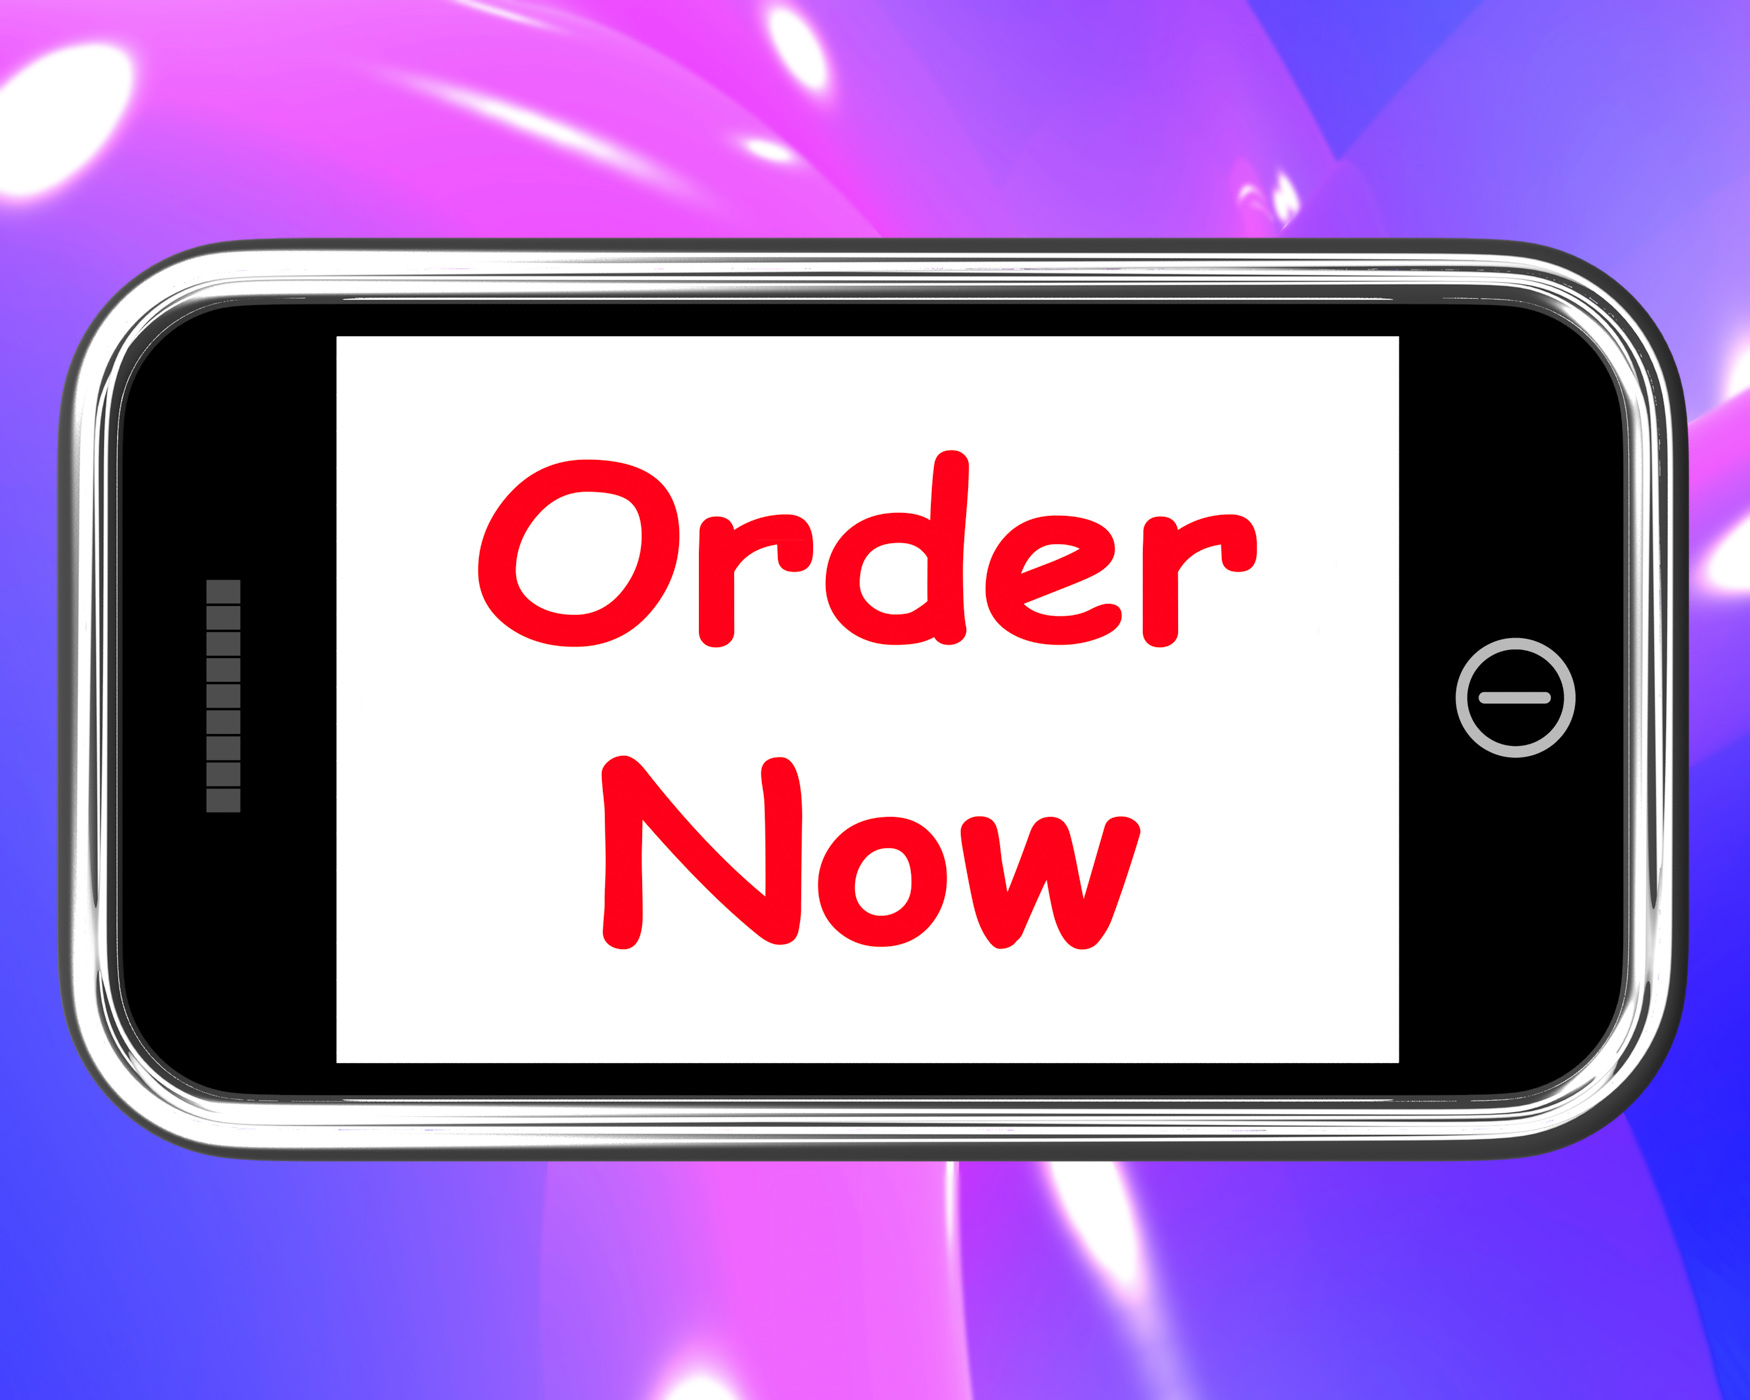 Order now on phone shows buying online in web stores photo